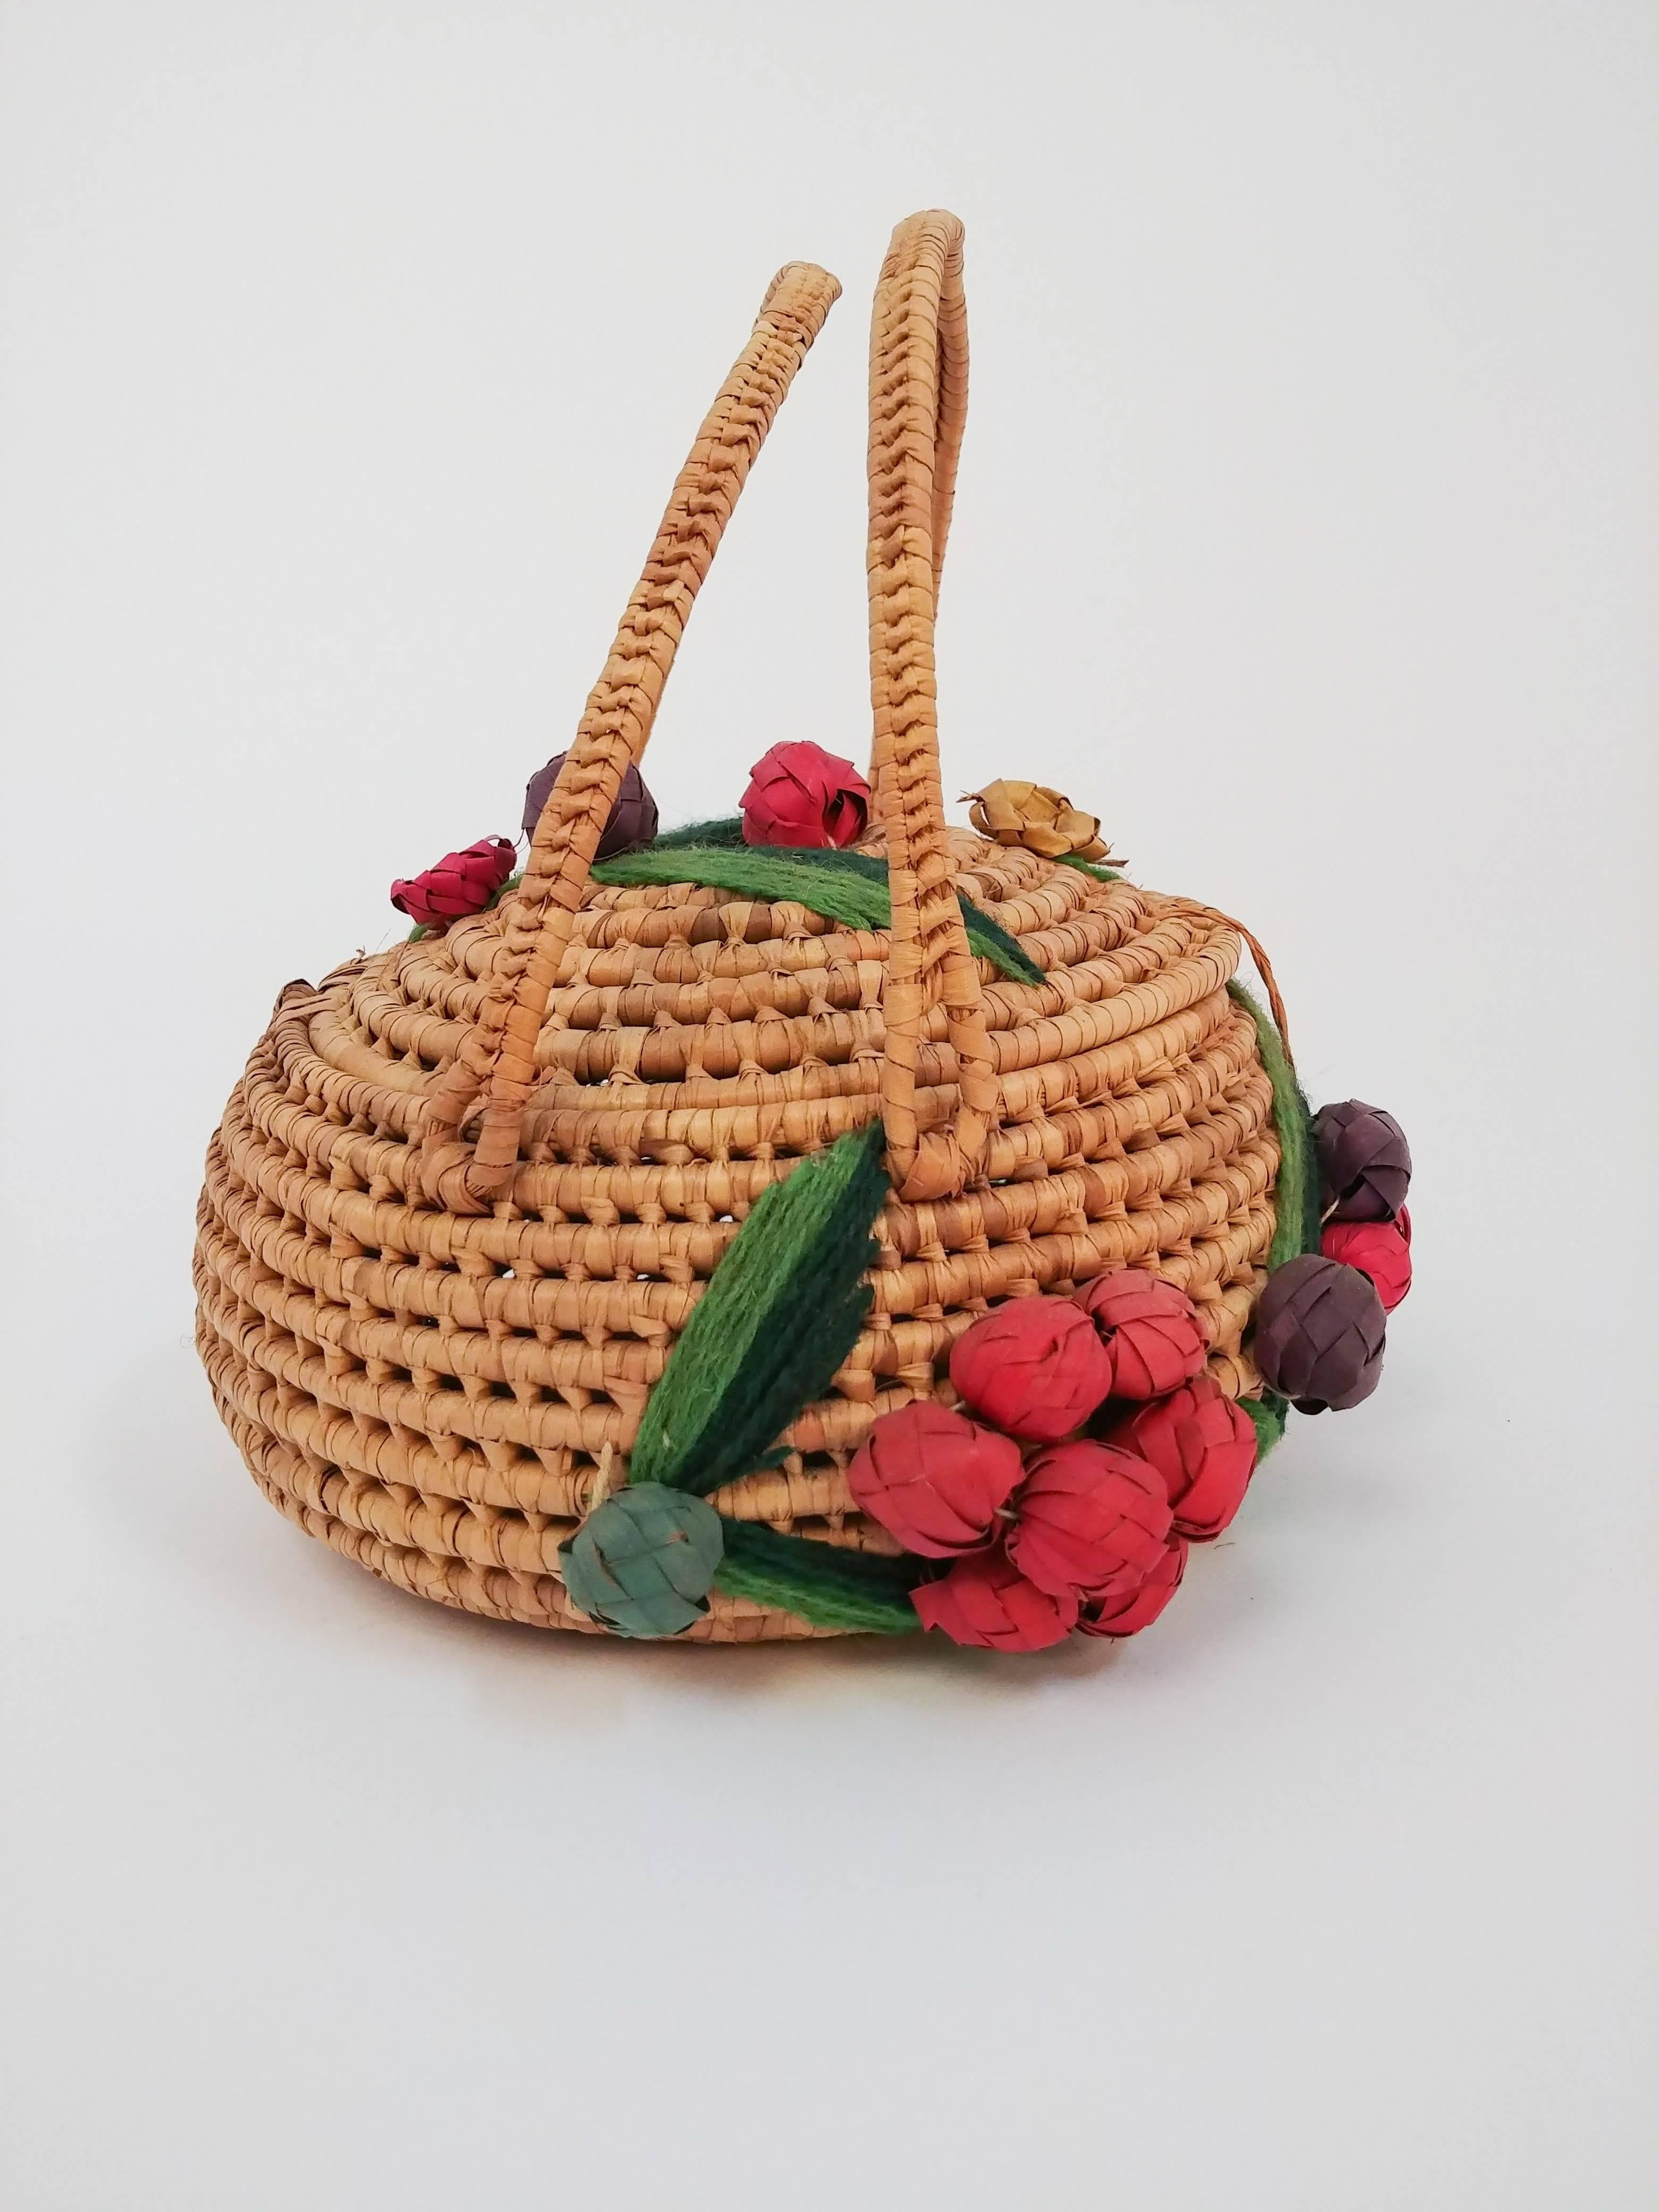 1950s Mexican Souvenir Woven Straw Purse. Adorable round 1950s straw purse with yarn embroidery and straw three dimensional flowers. 